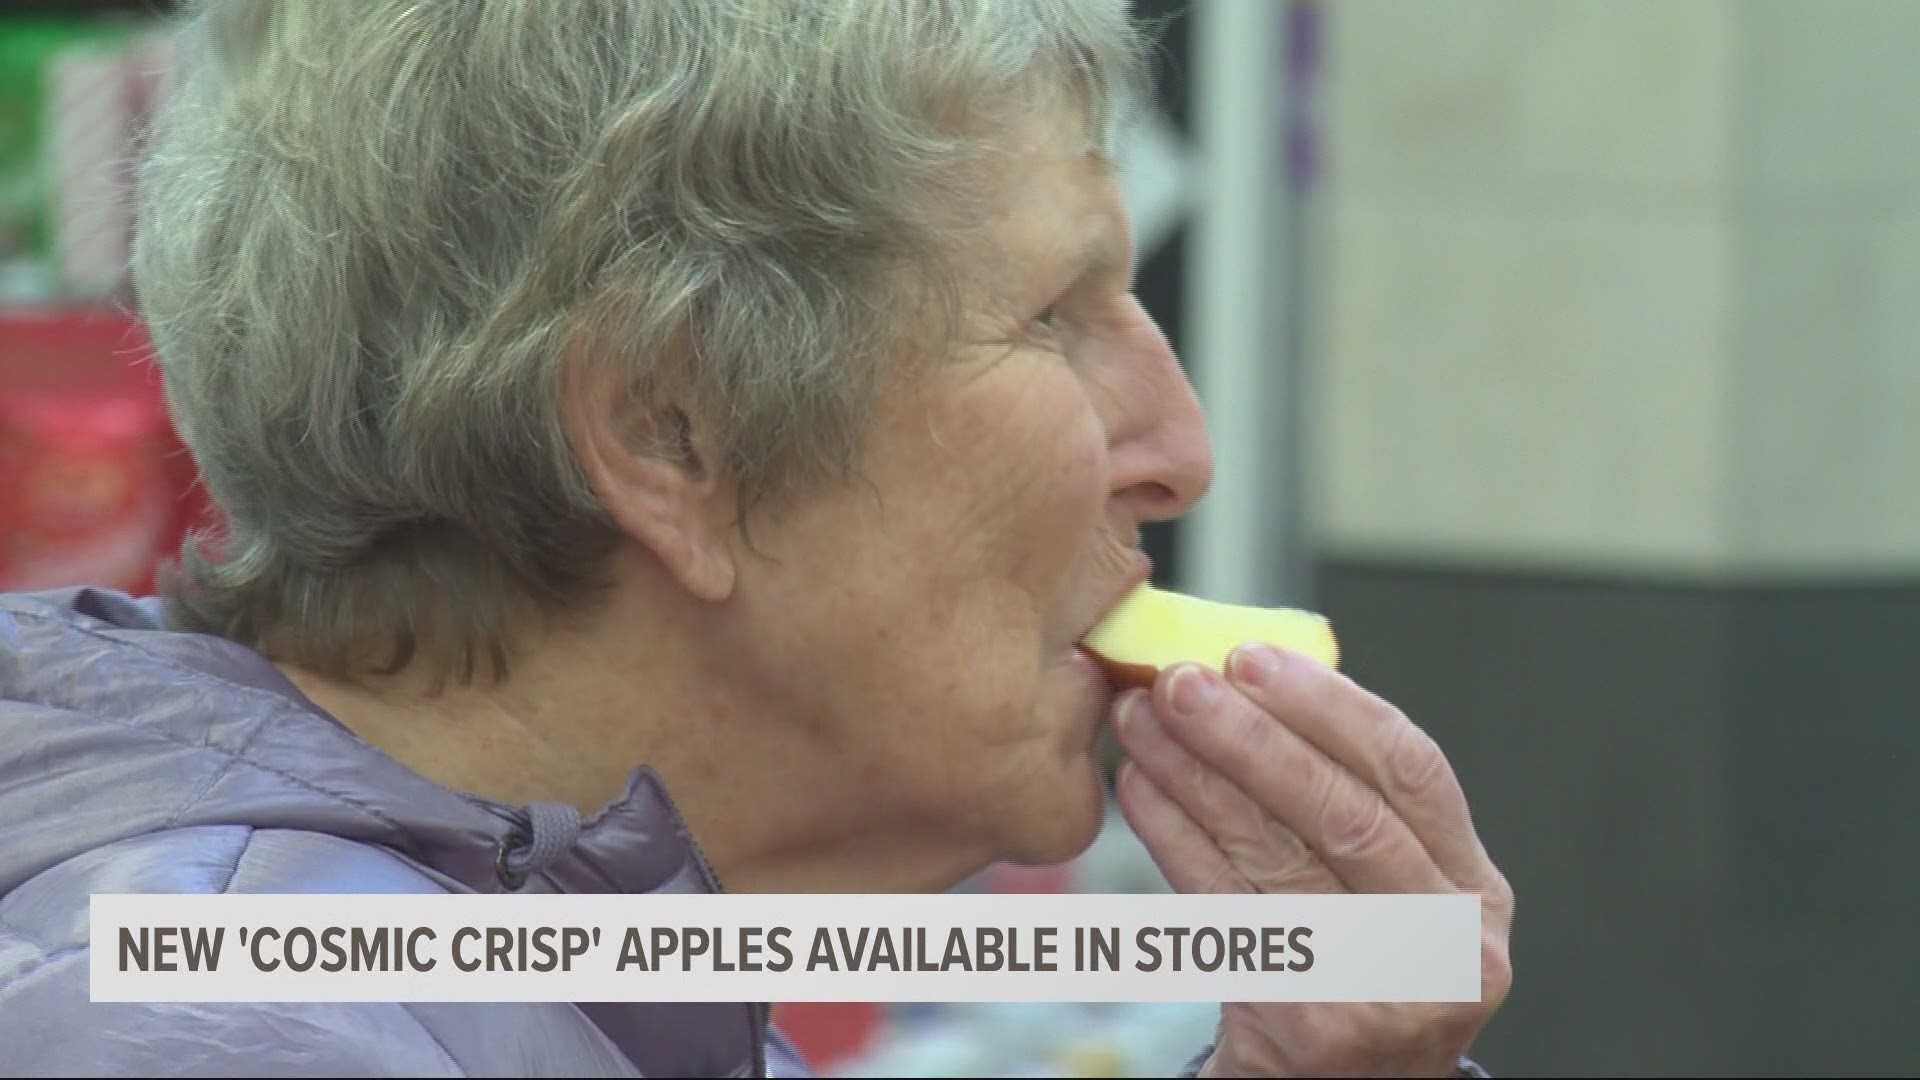 New Cosmic Crisp apples are available in stores. But are they out of this world?